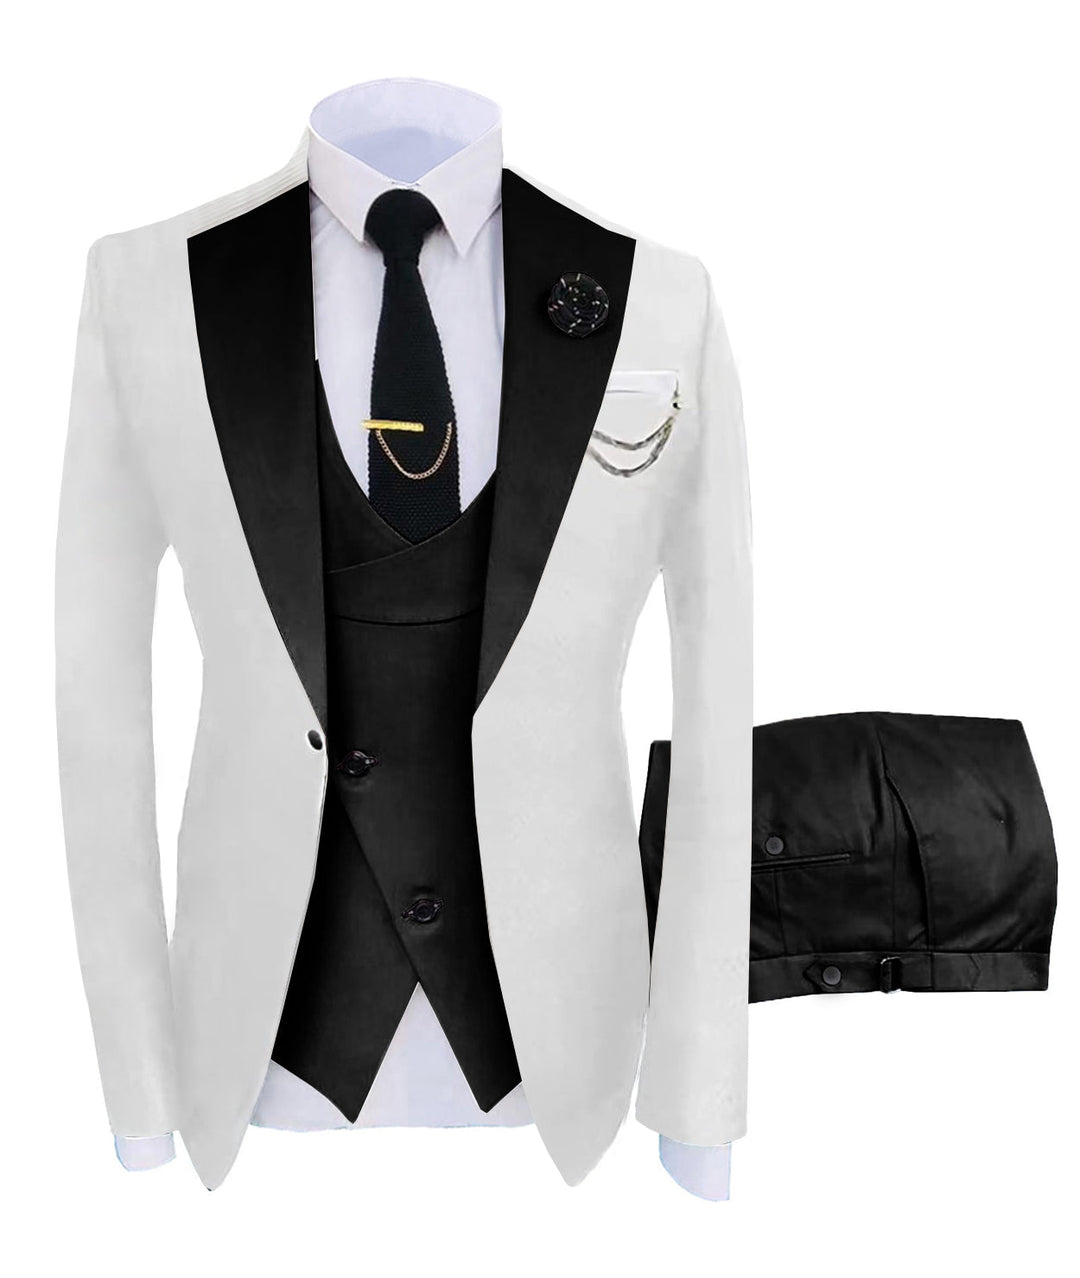 Men's Suits and Tuxedos - Men's Clothing